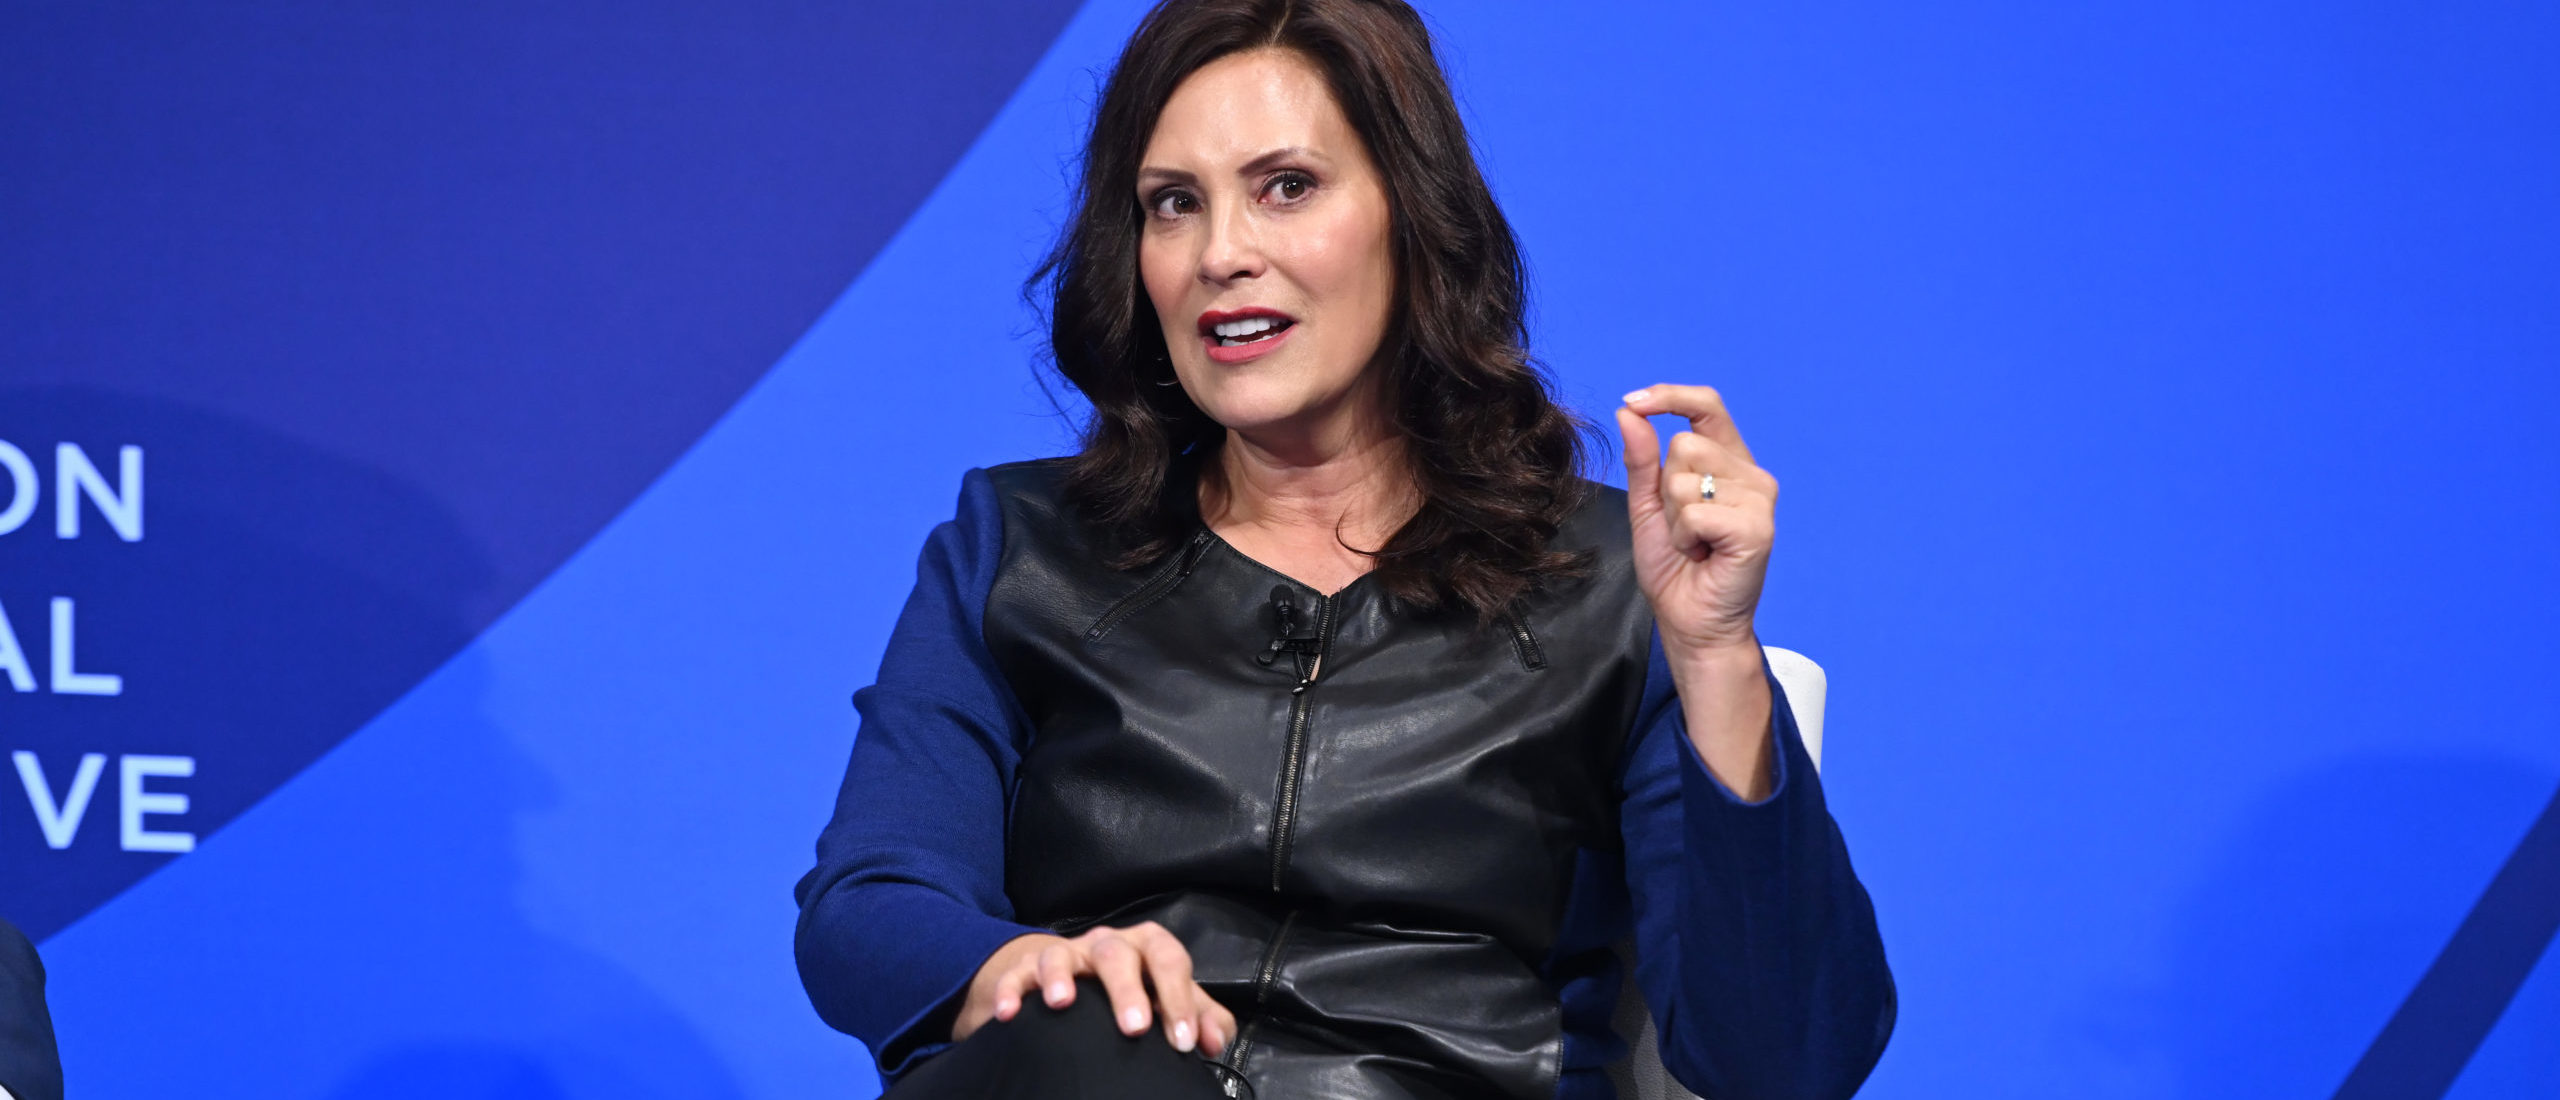 NEW YORK, NEW YORK - SEPTEMBER 19: Michigan Gov. Gretchen Whitmer participates in the session "Women’s Rights are Human Rights: How to Provide Abortion Care in a Post-Dobbs World" onstage during the Clinton Global Initiative September 2023 Meeting at New York Hilton Midtown on September 19, 2023 in New York City. (Photo by Noam Galai/Getty Images for Clinton Global Initiative)